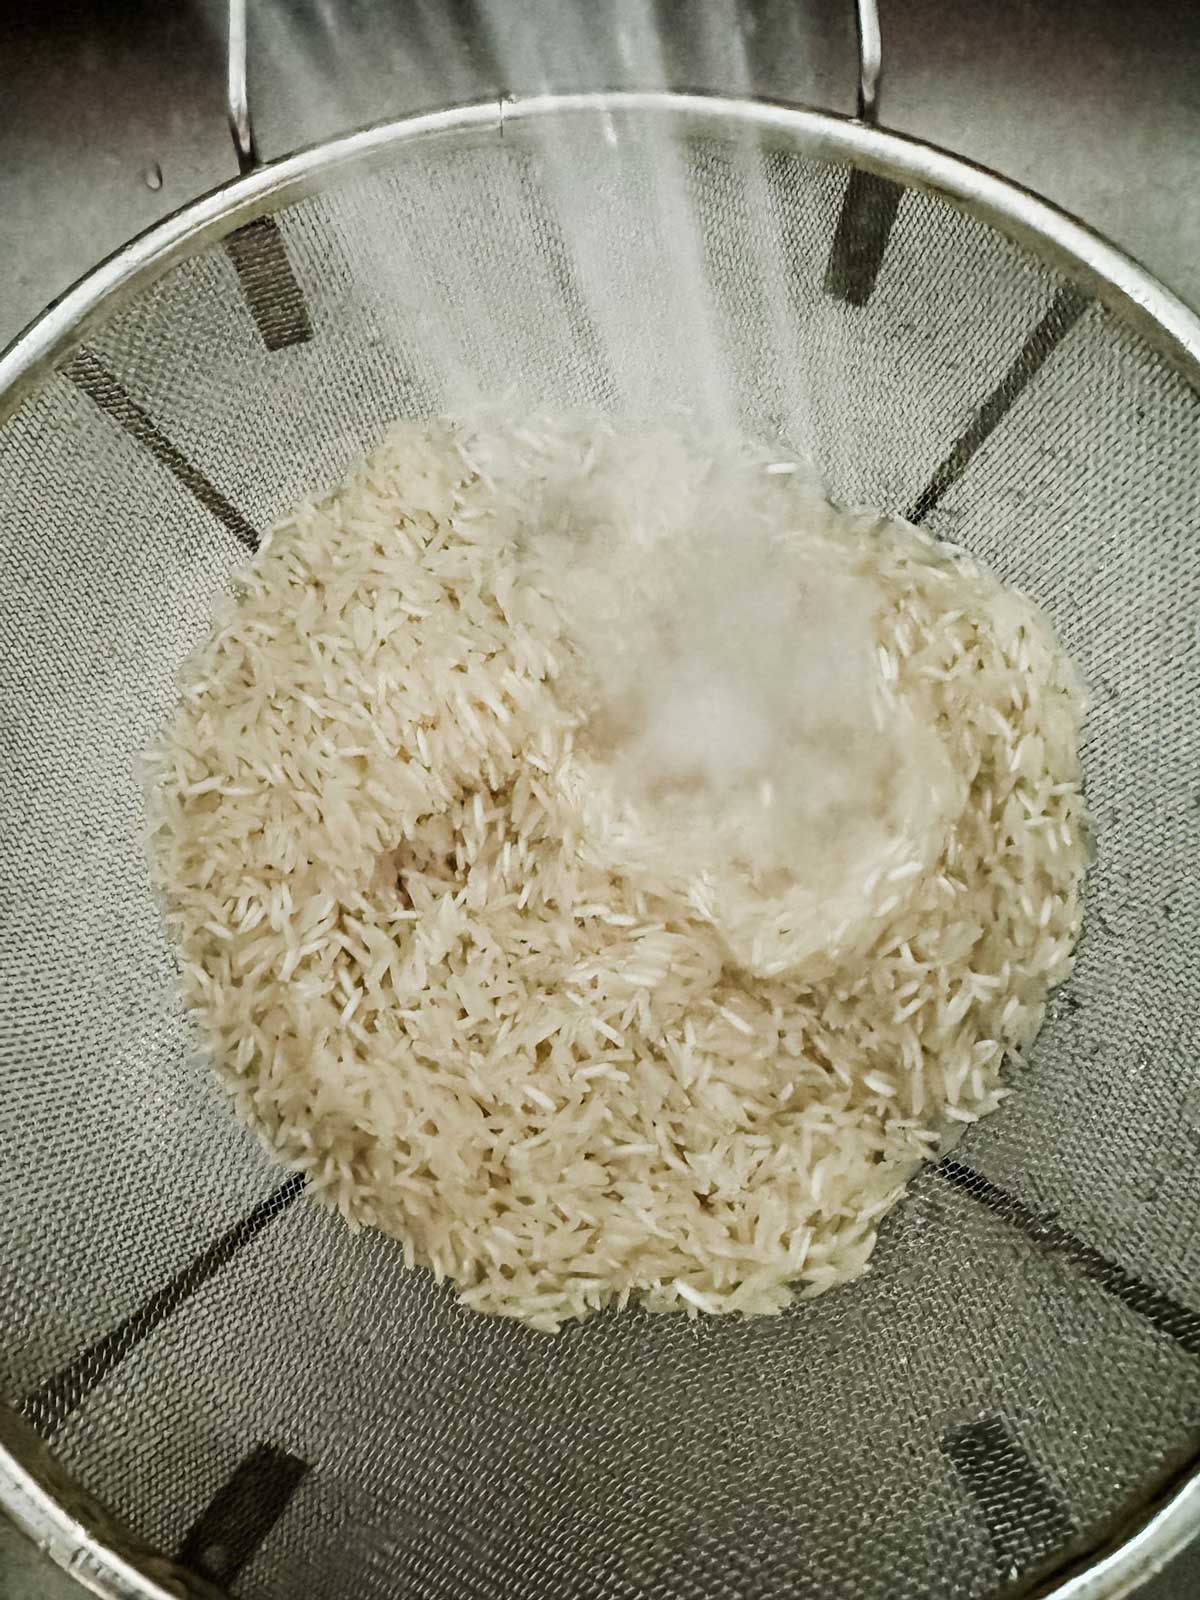 Rice in a strainer being rinsed.